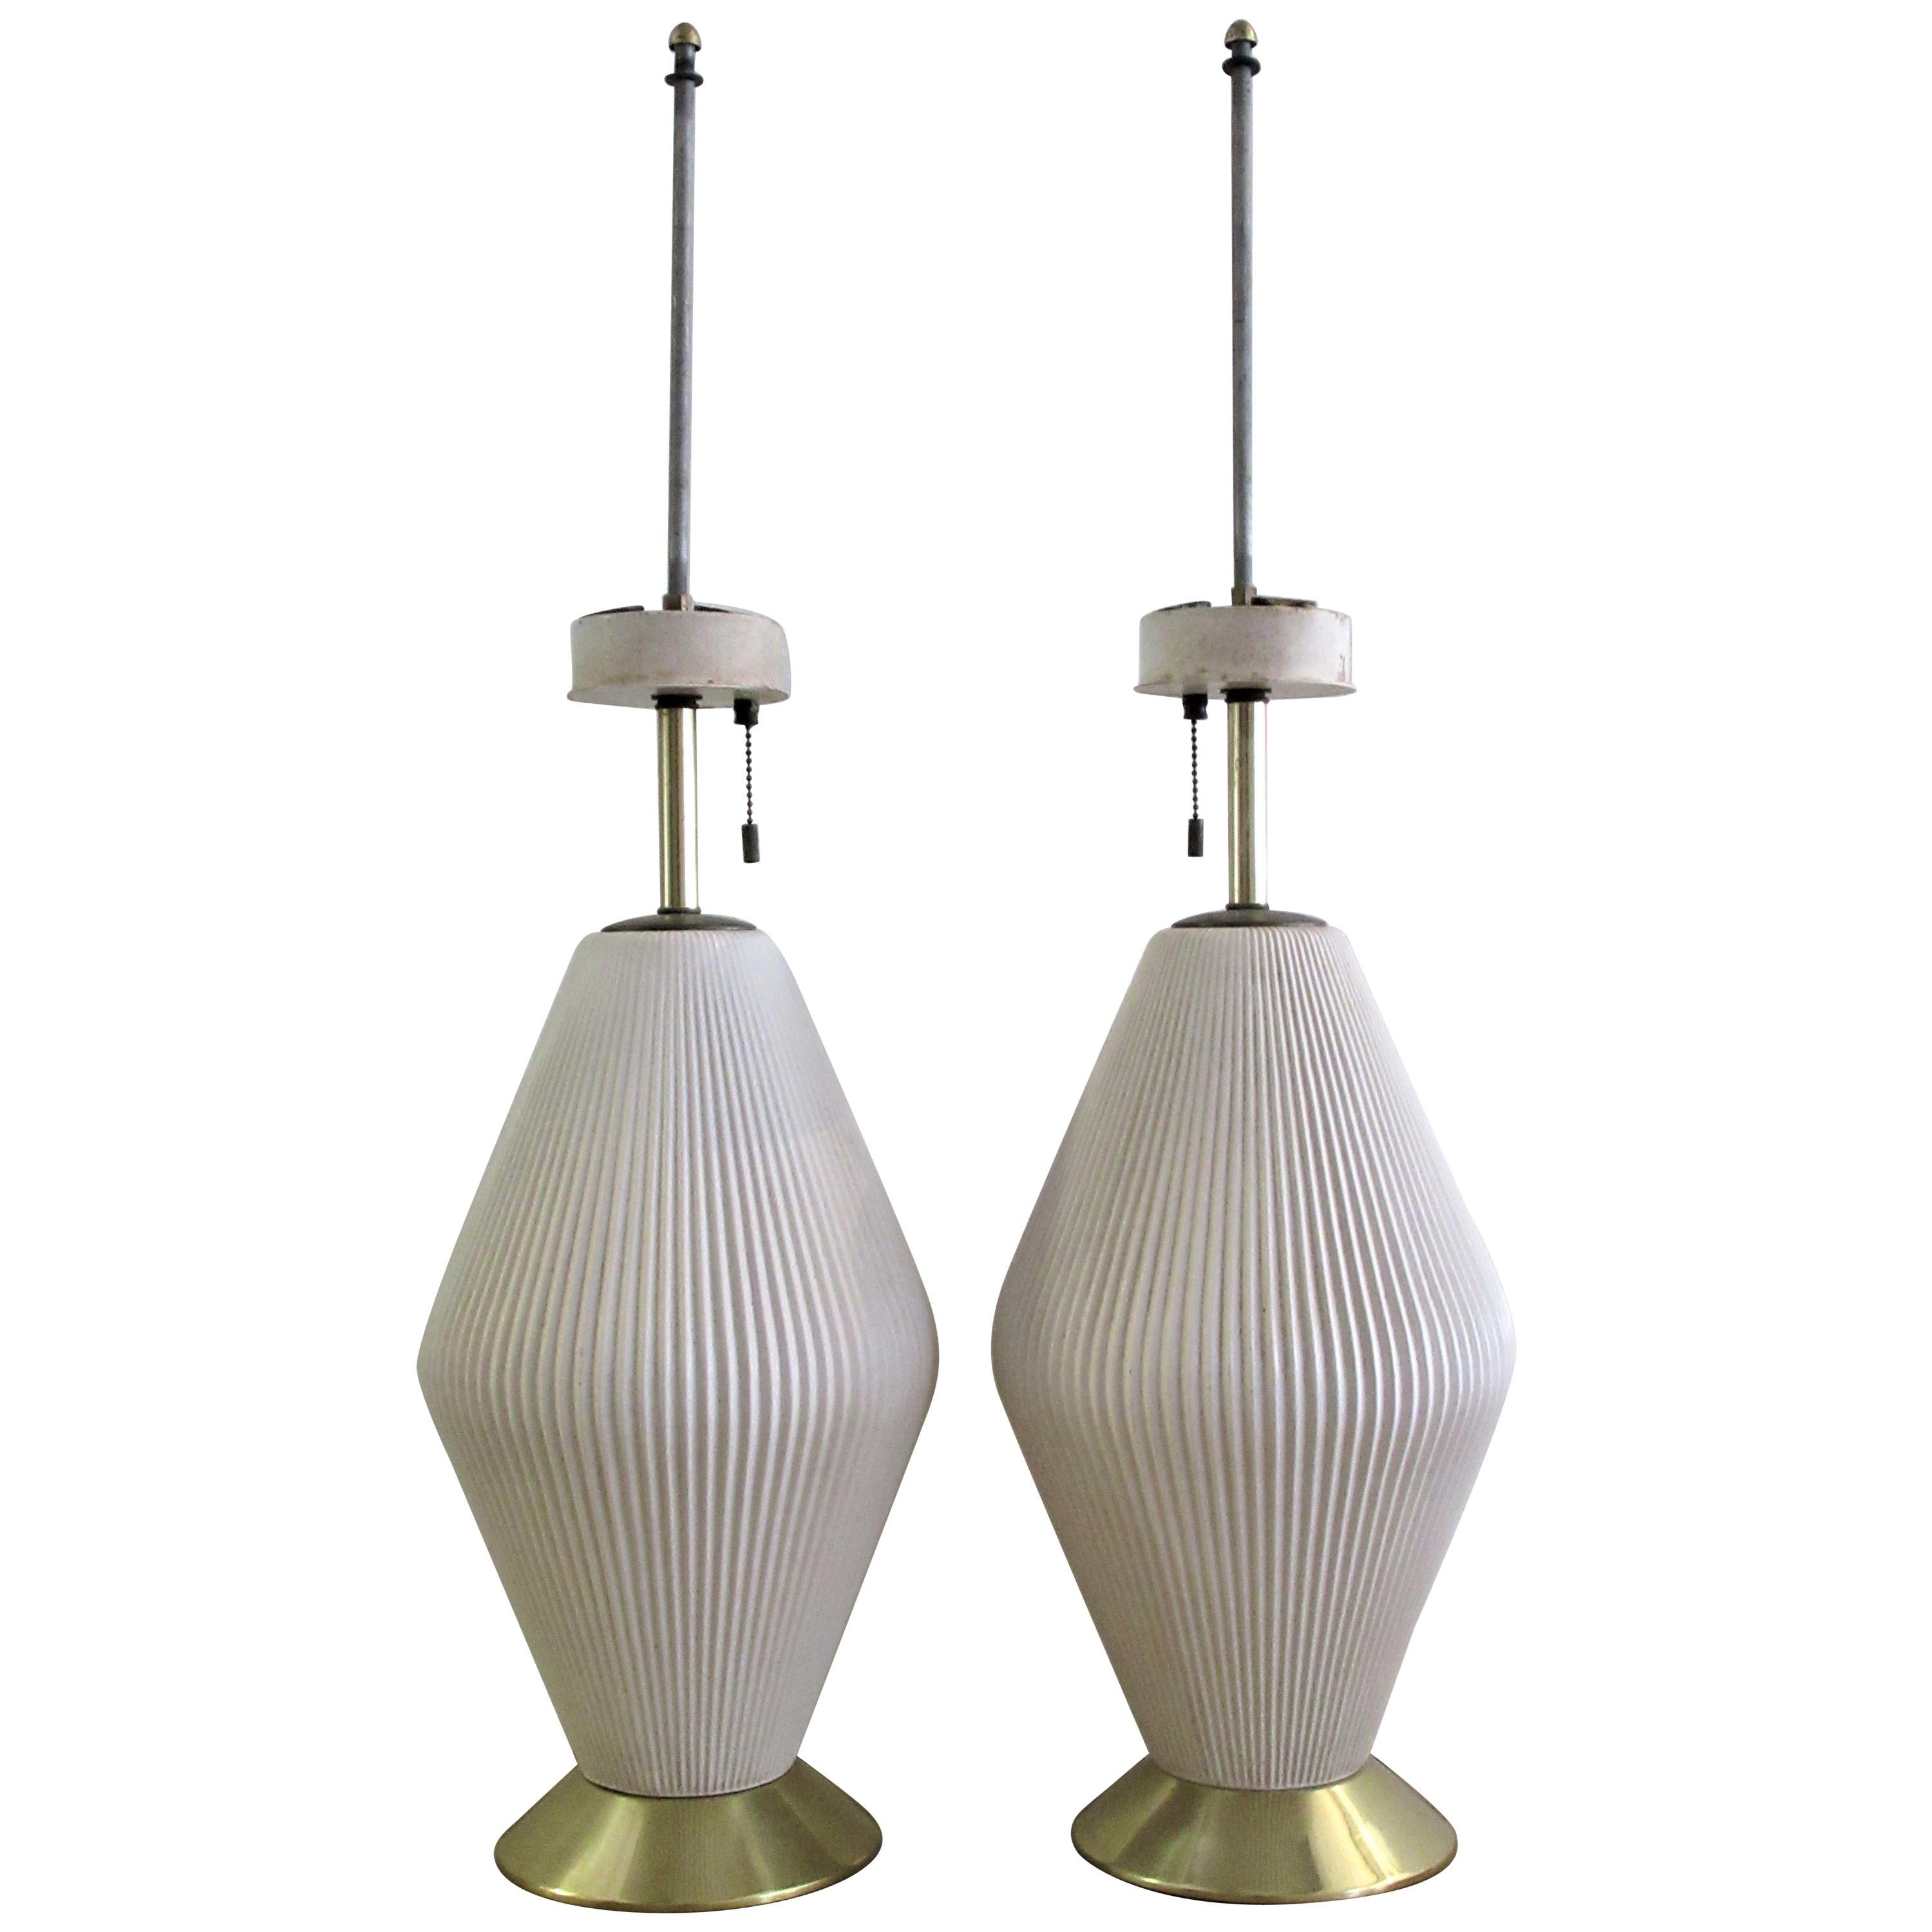 Fluted Porcelain Table Lamps by Gerald Thurston for Lightolier